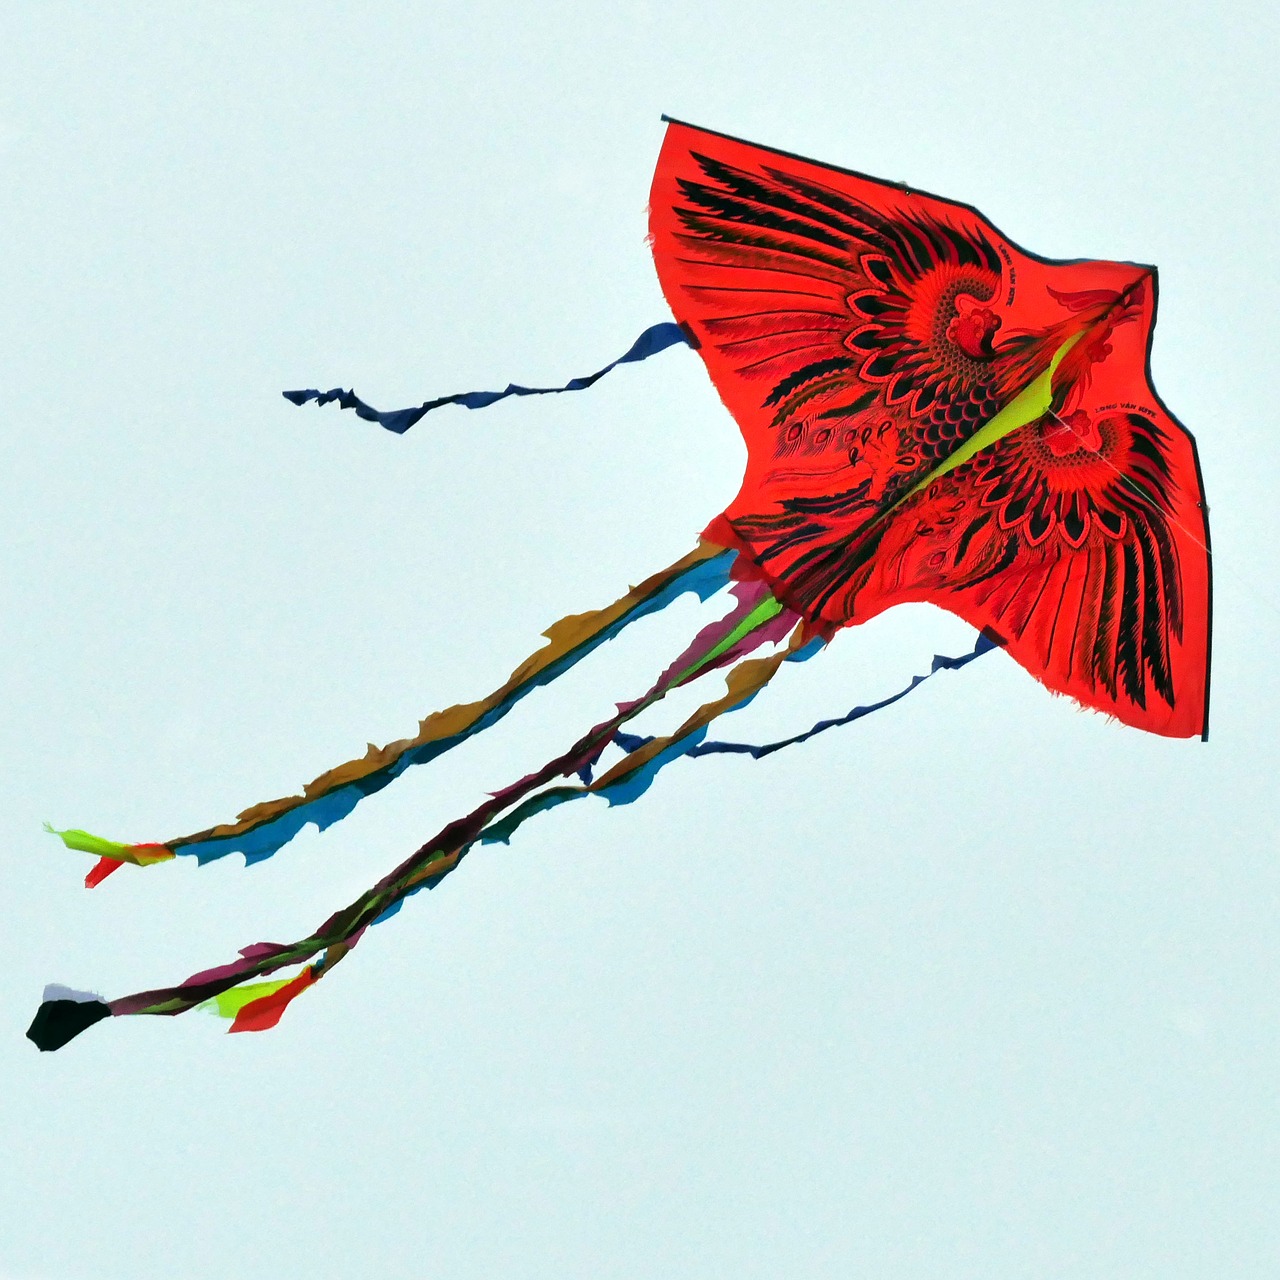 paper dragon fly of kite flying free photo